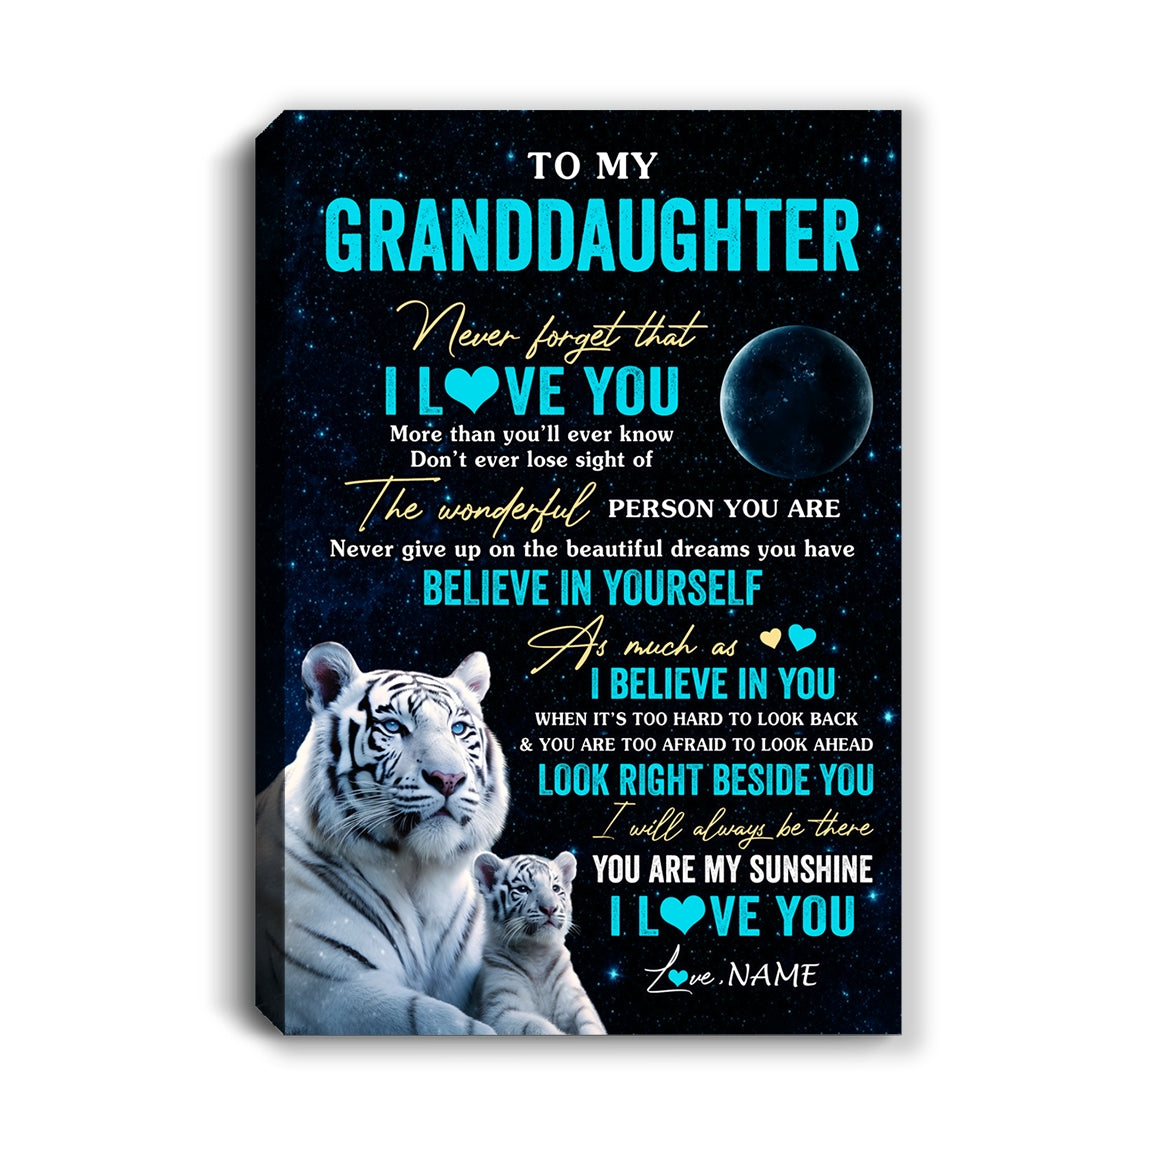 Personalized_To_My_Granddaughter_Canvas_From_Grandma_Nana_Never_Forget_I_Love_You_White_Tiger_Granddaughter_Birthday_Gifts_Christmas_Custom_Wall_Art_Print_Framed_Canvas_Canvas_mockup-1.jpg